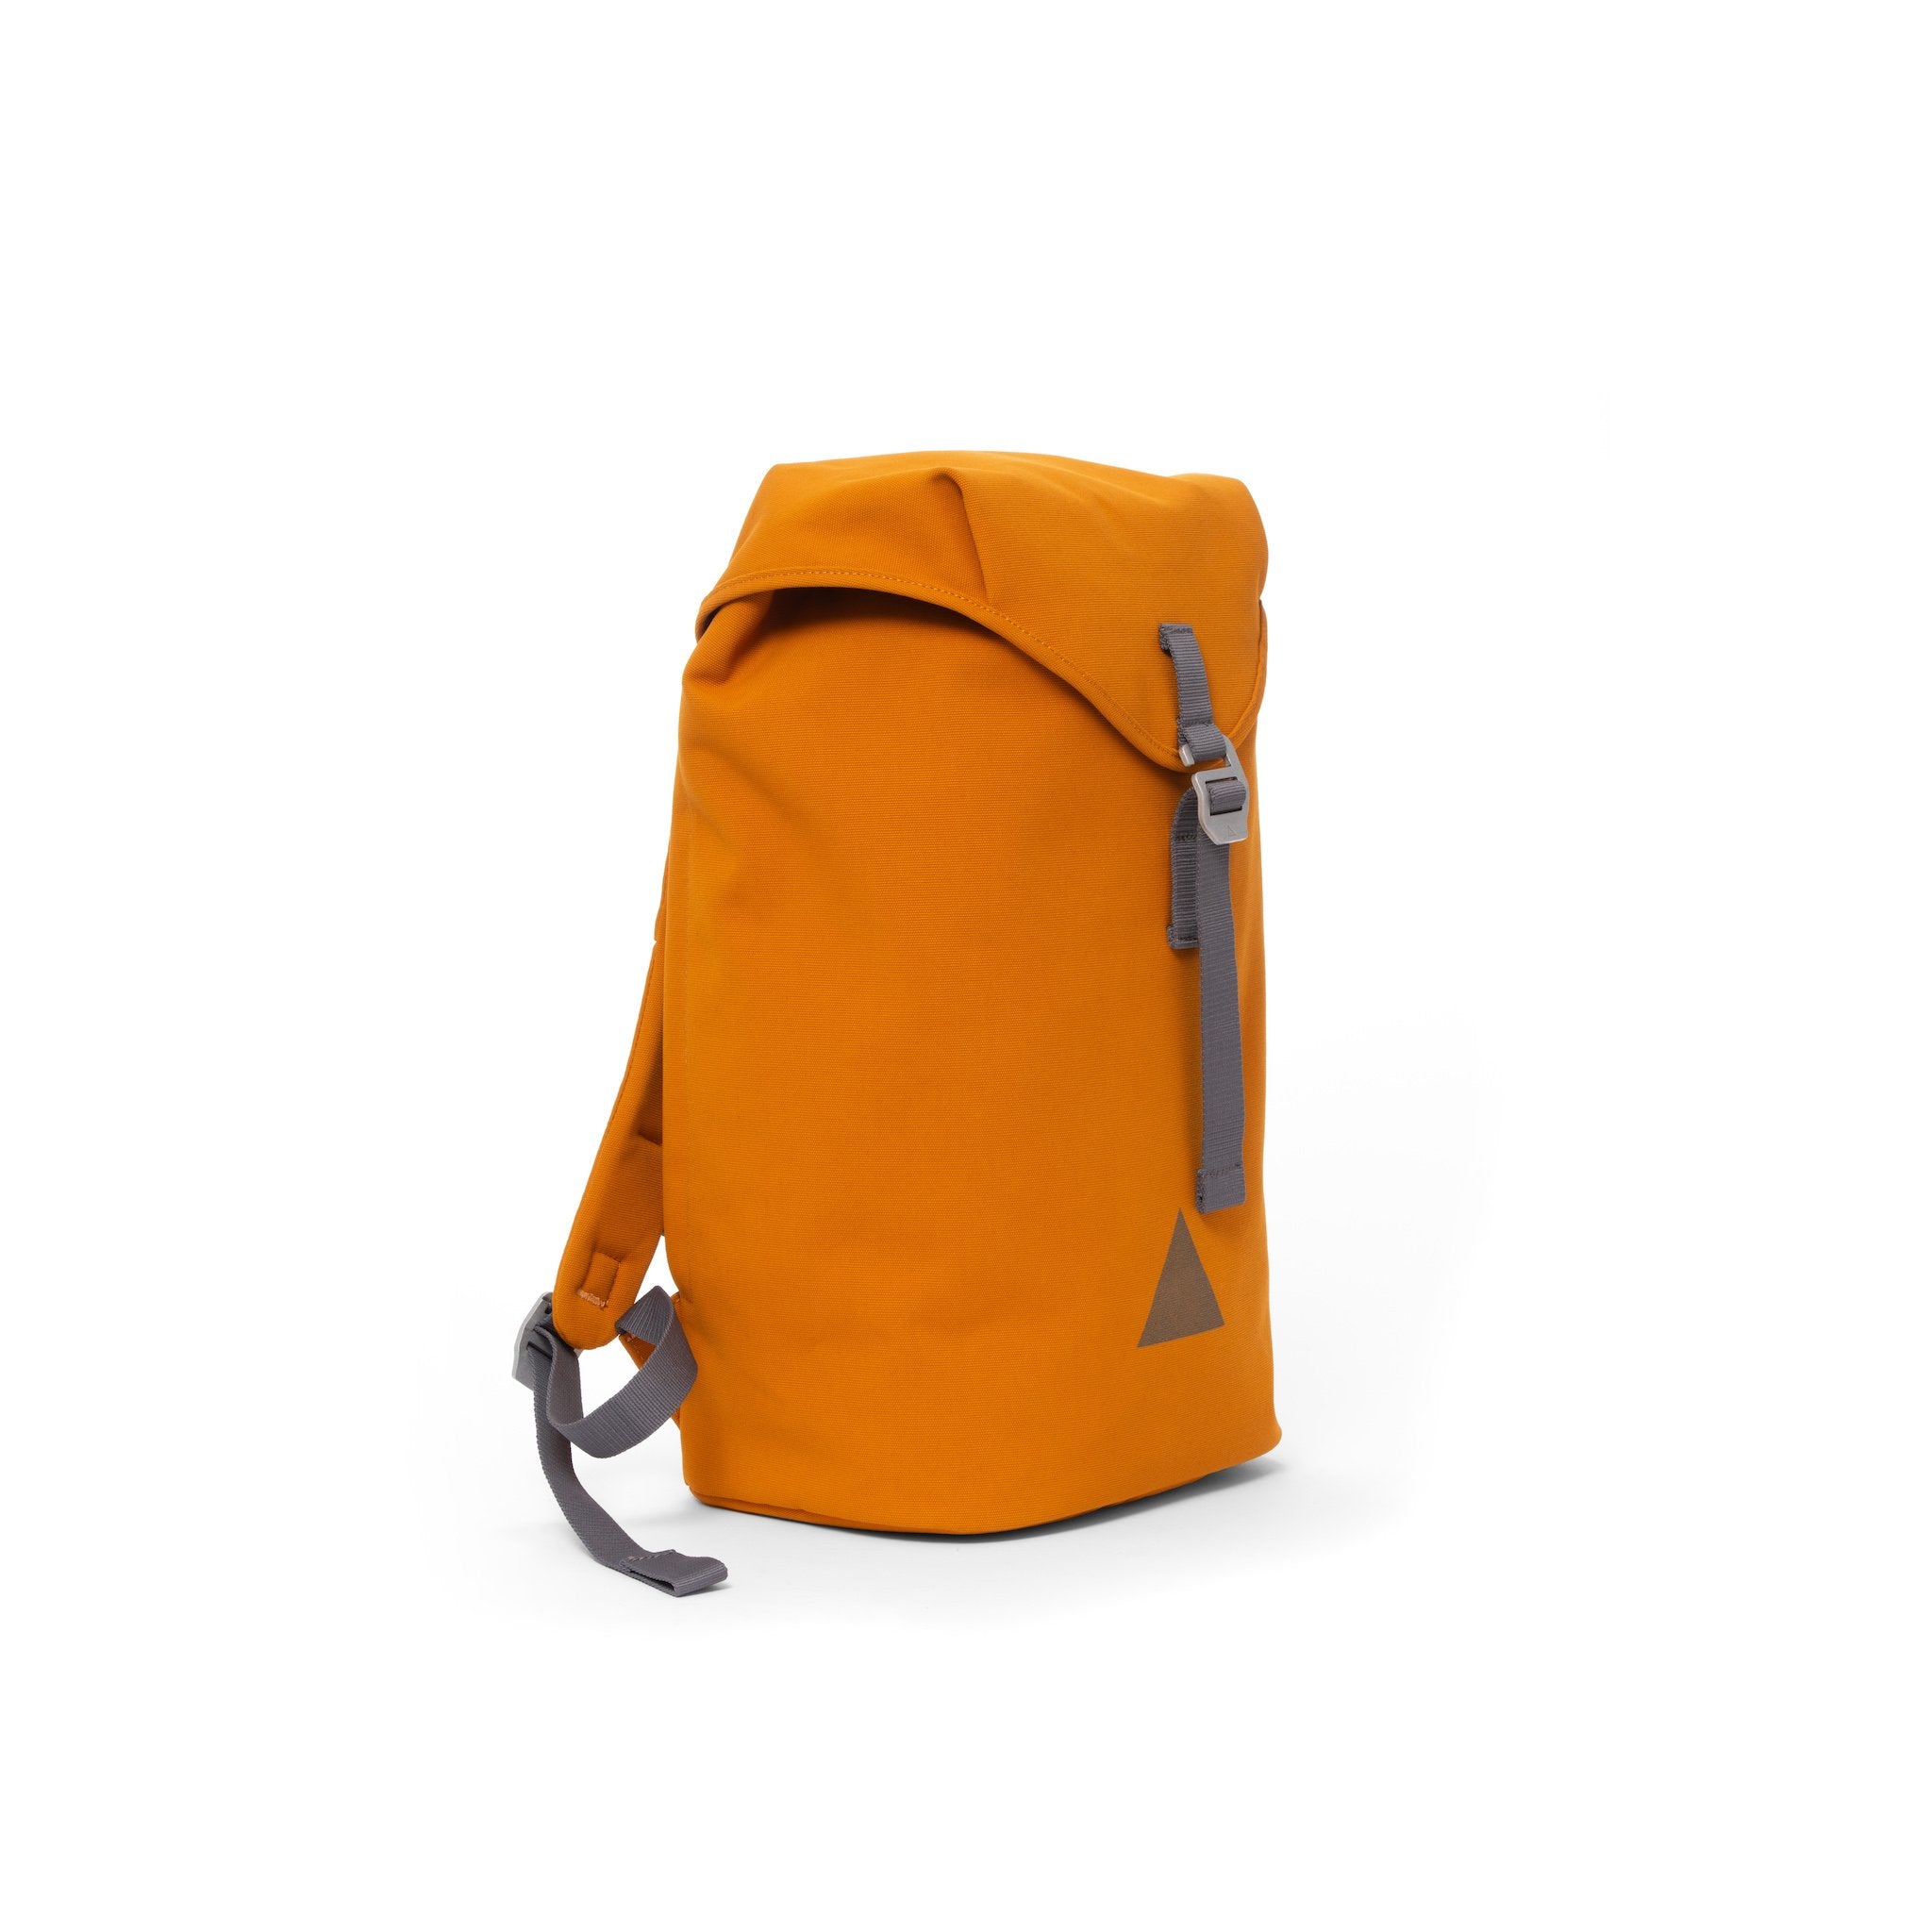 Orange recycled canvas backpack with strap closure and metal buckle.